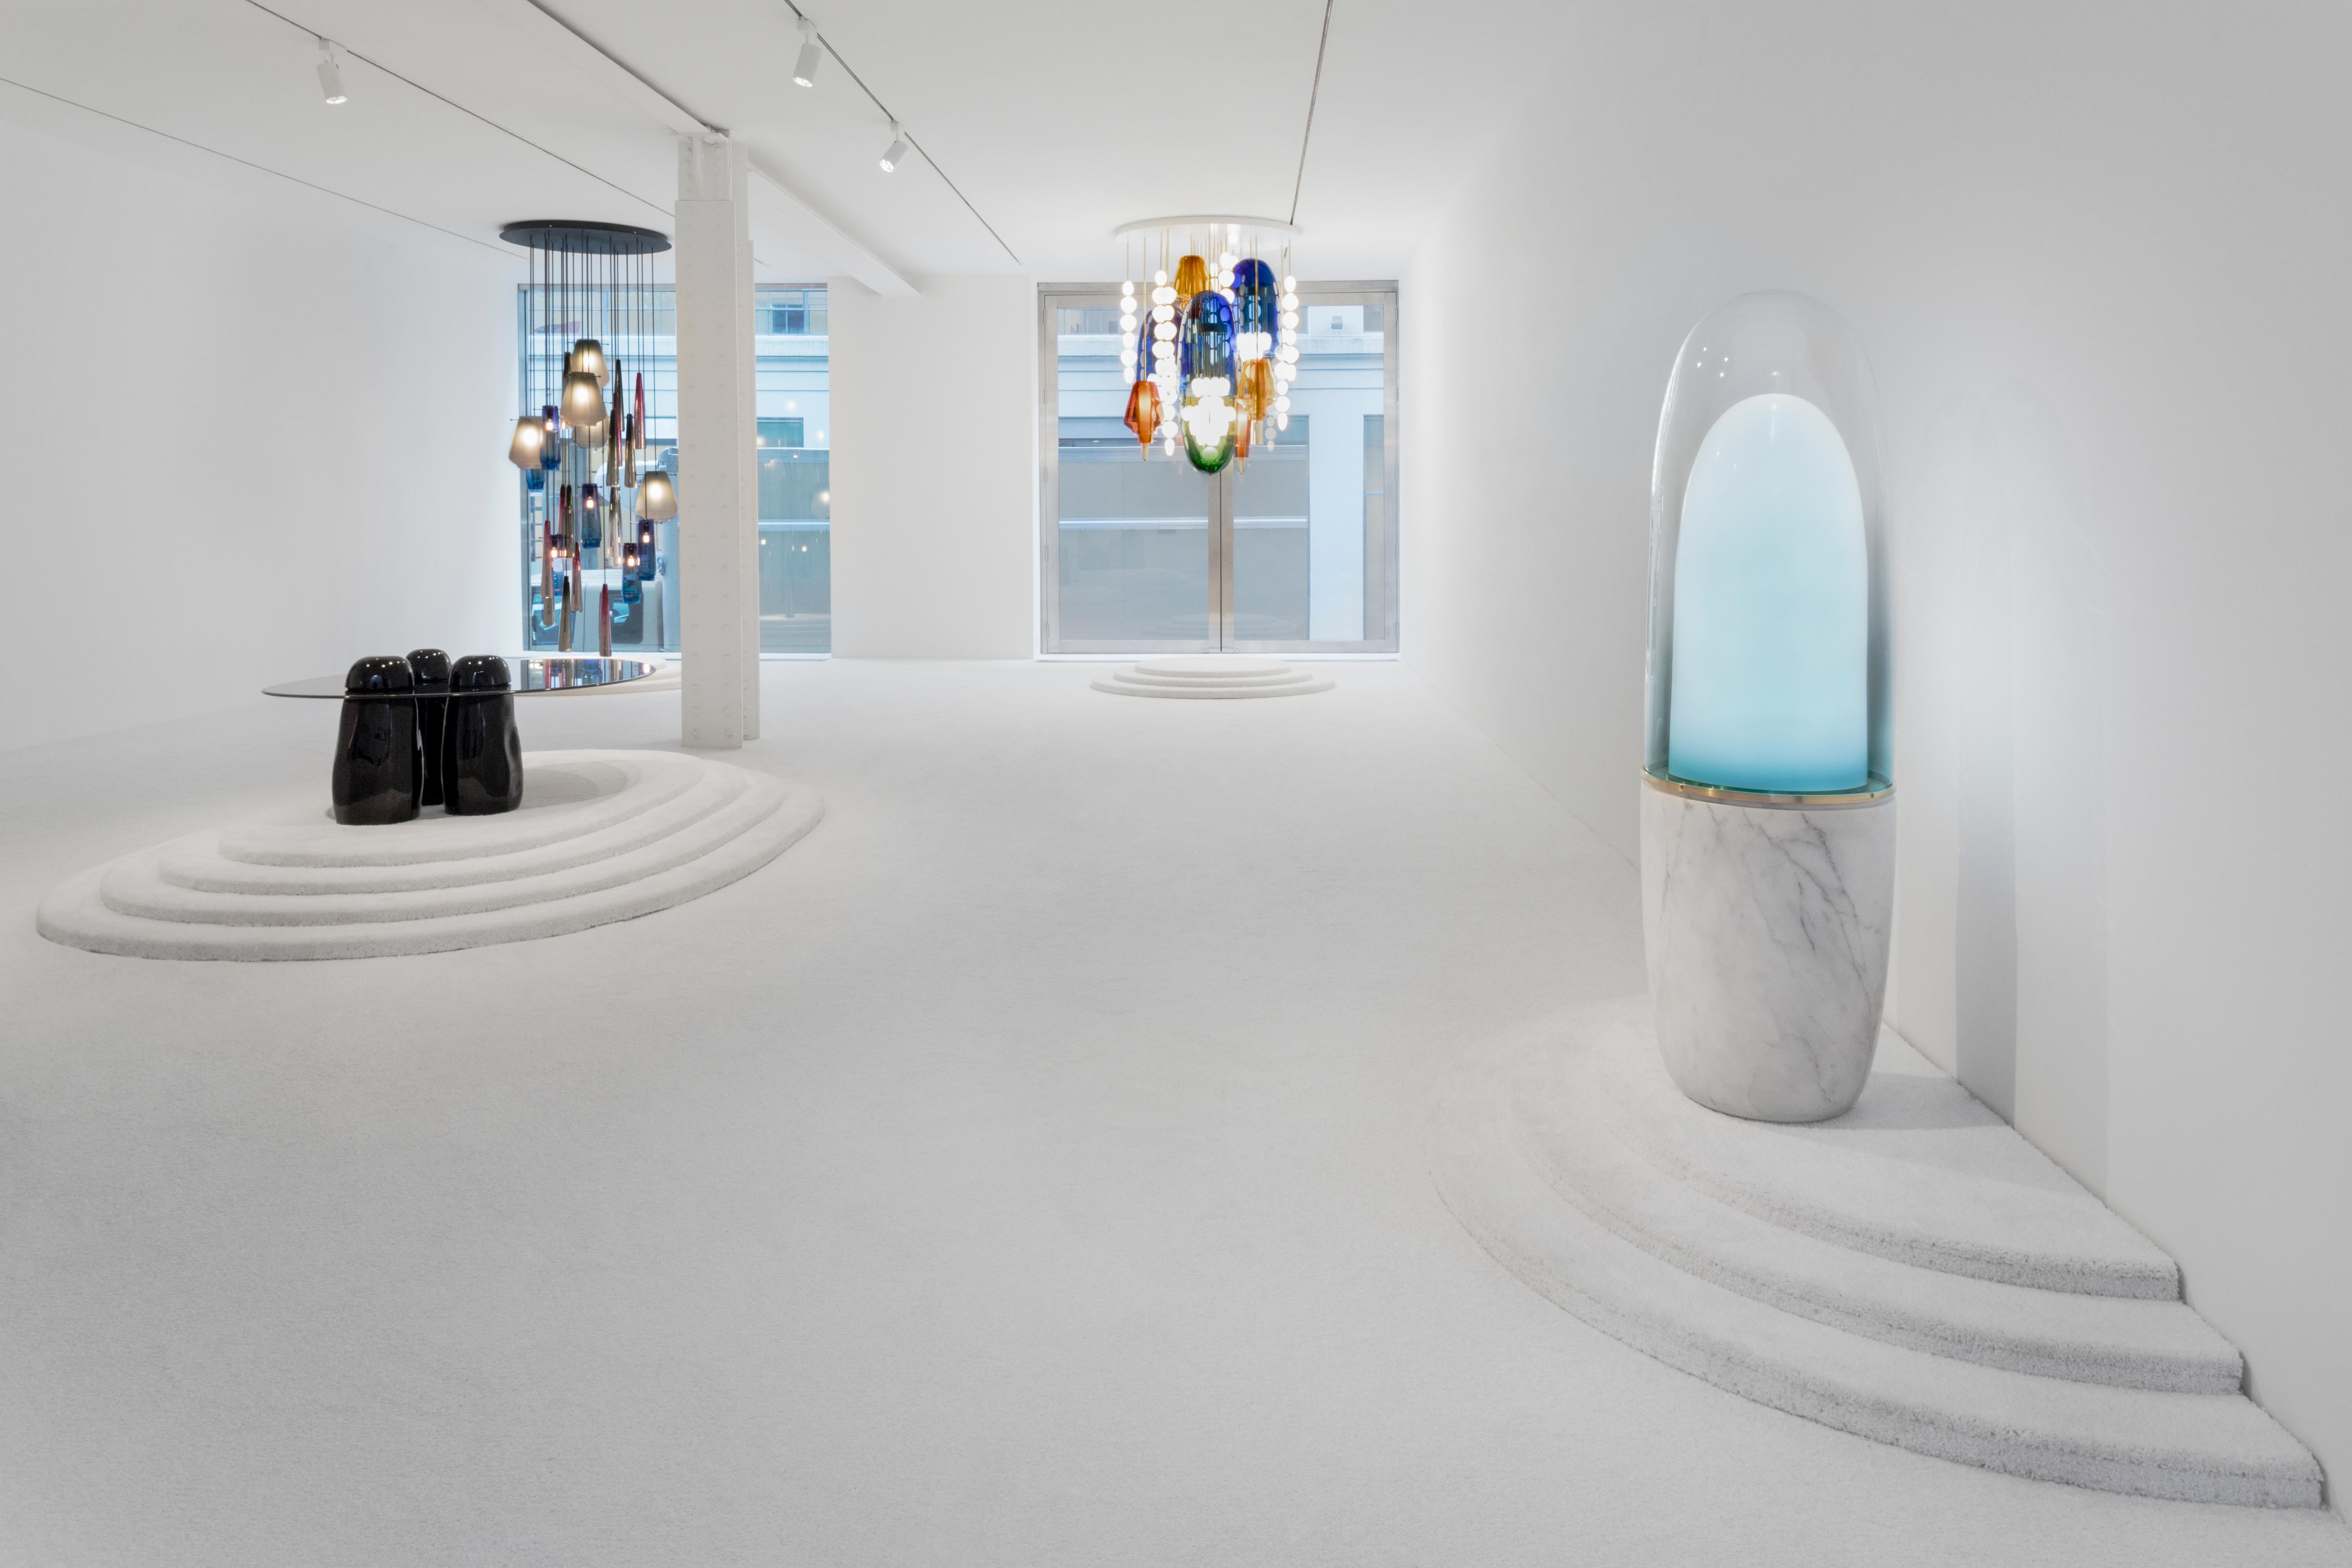 Ini Archibong [American, b. 1983]
Obelisk, 2019
Marble, glass
Measures: 58 x 16.75 x 16.75 inches
147.5 x 42.3 x 42.3 cm
Edition of 8 

Ini Archibong imparts a deeply personal and spiritual approach to design. Archibong's practice is characterized